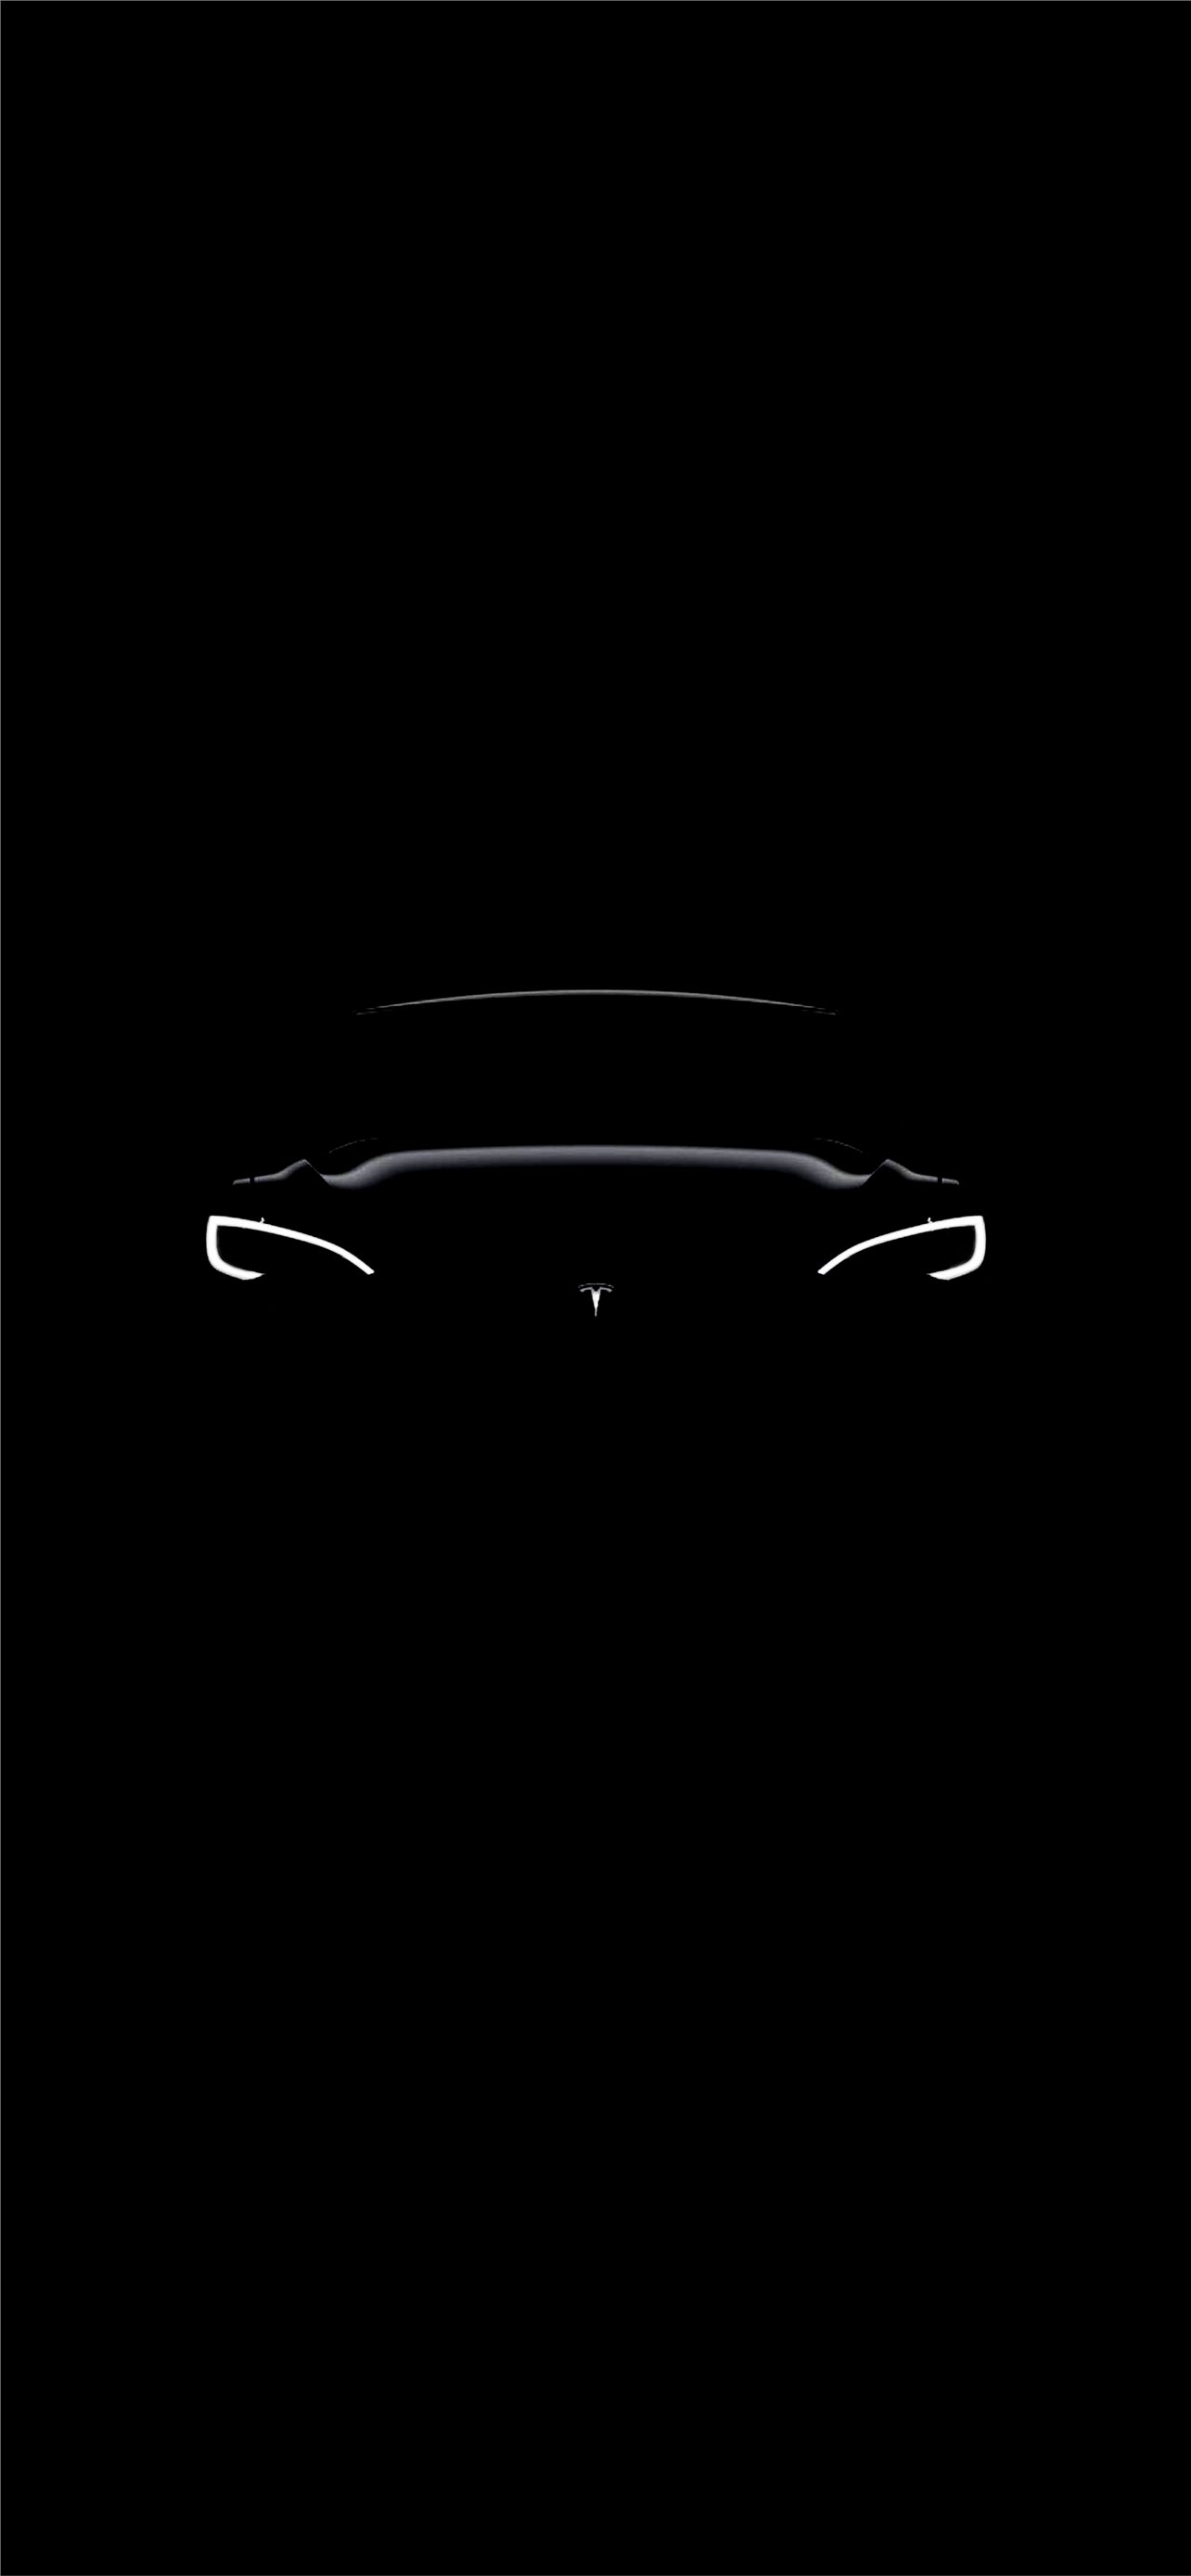 Made a Tesla S for my Pro TeslaLounge iPhone wallpaper 